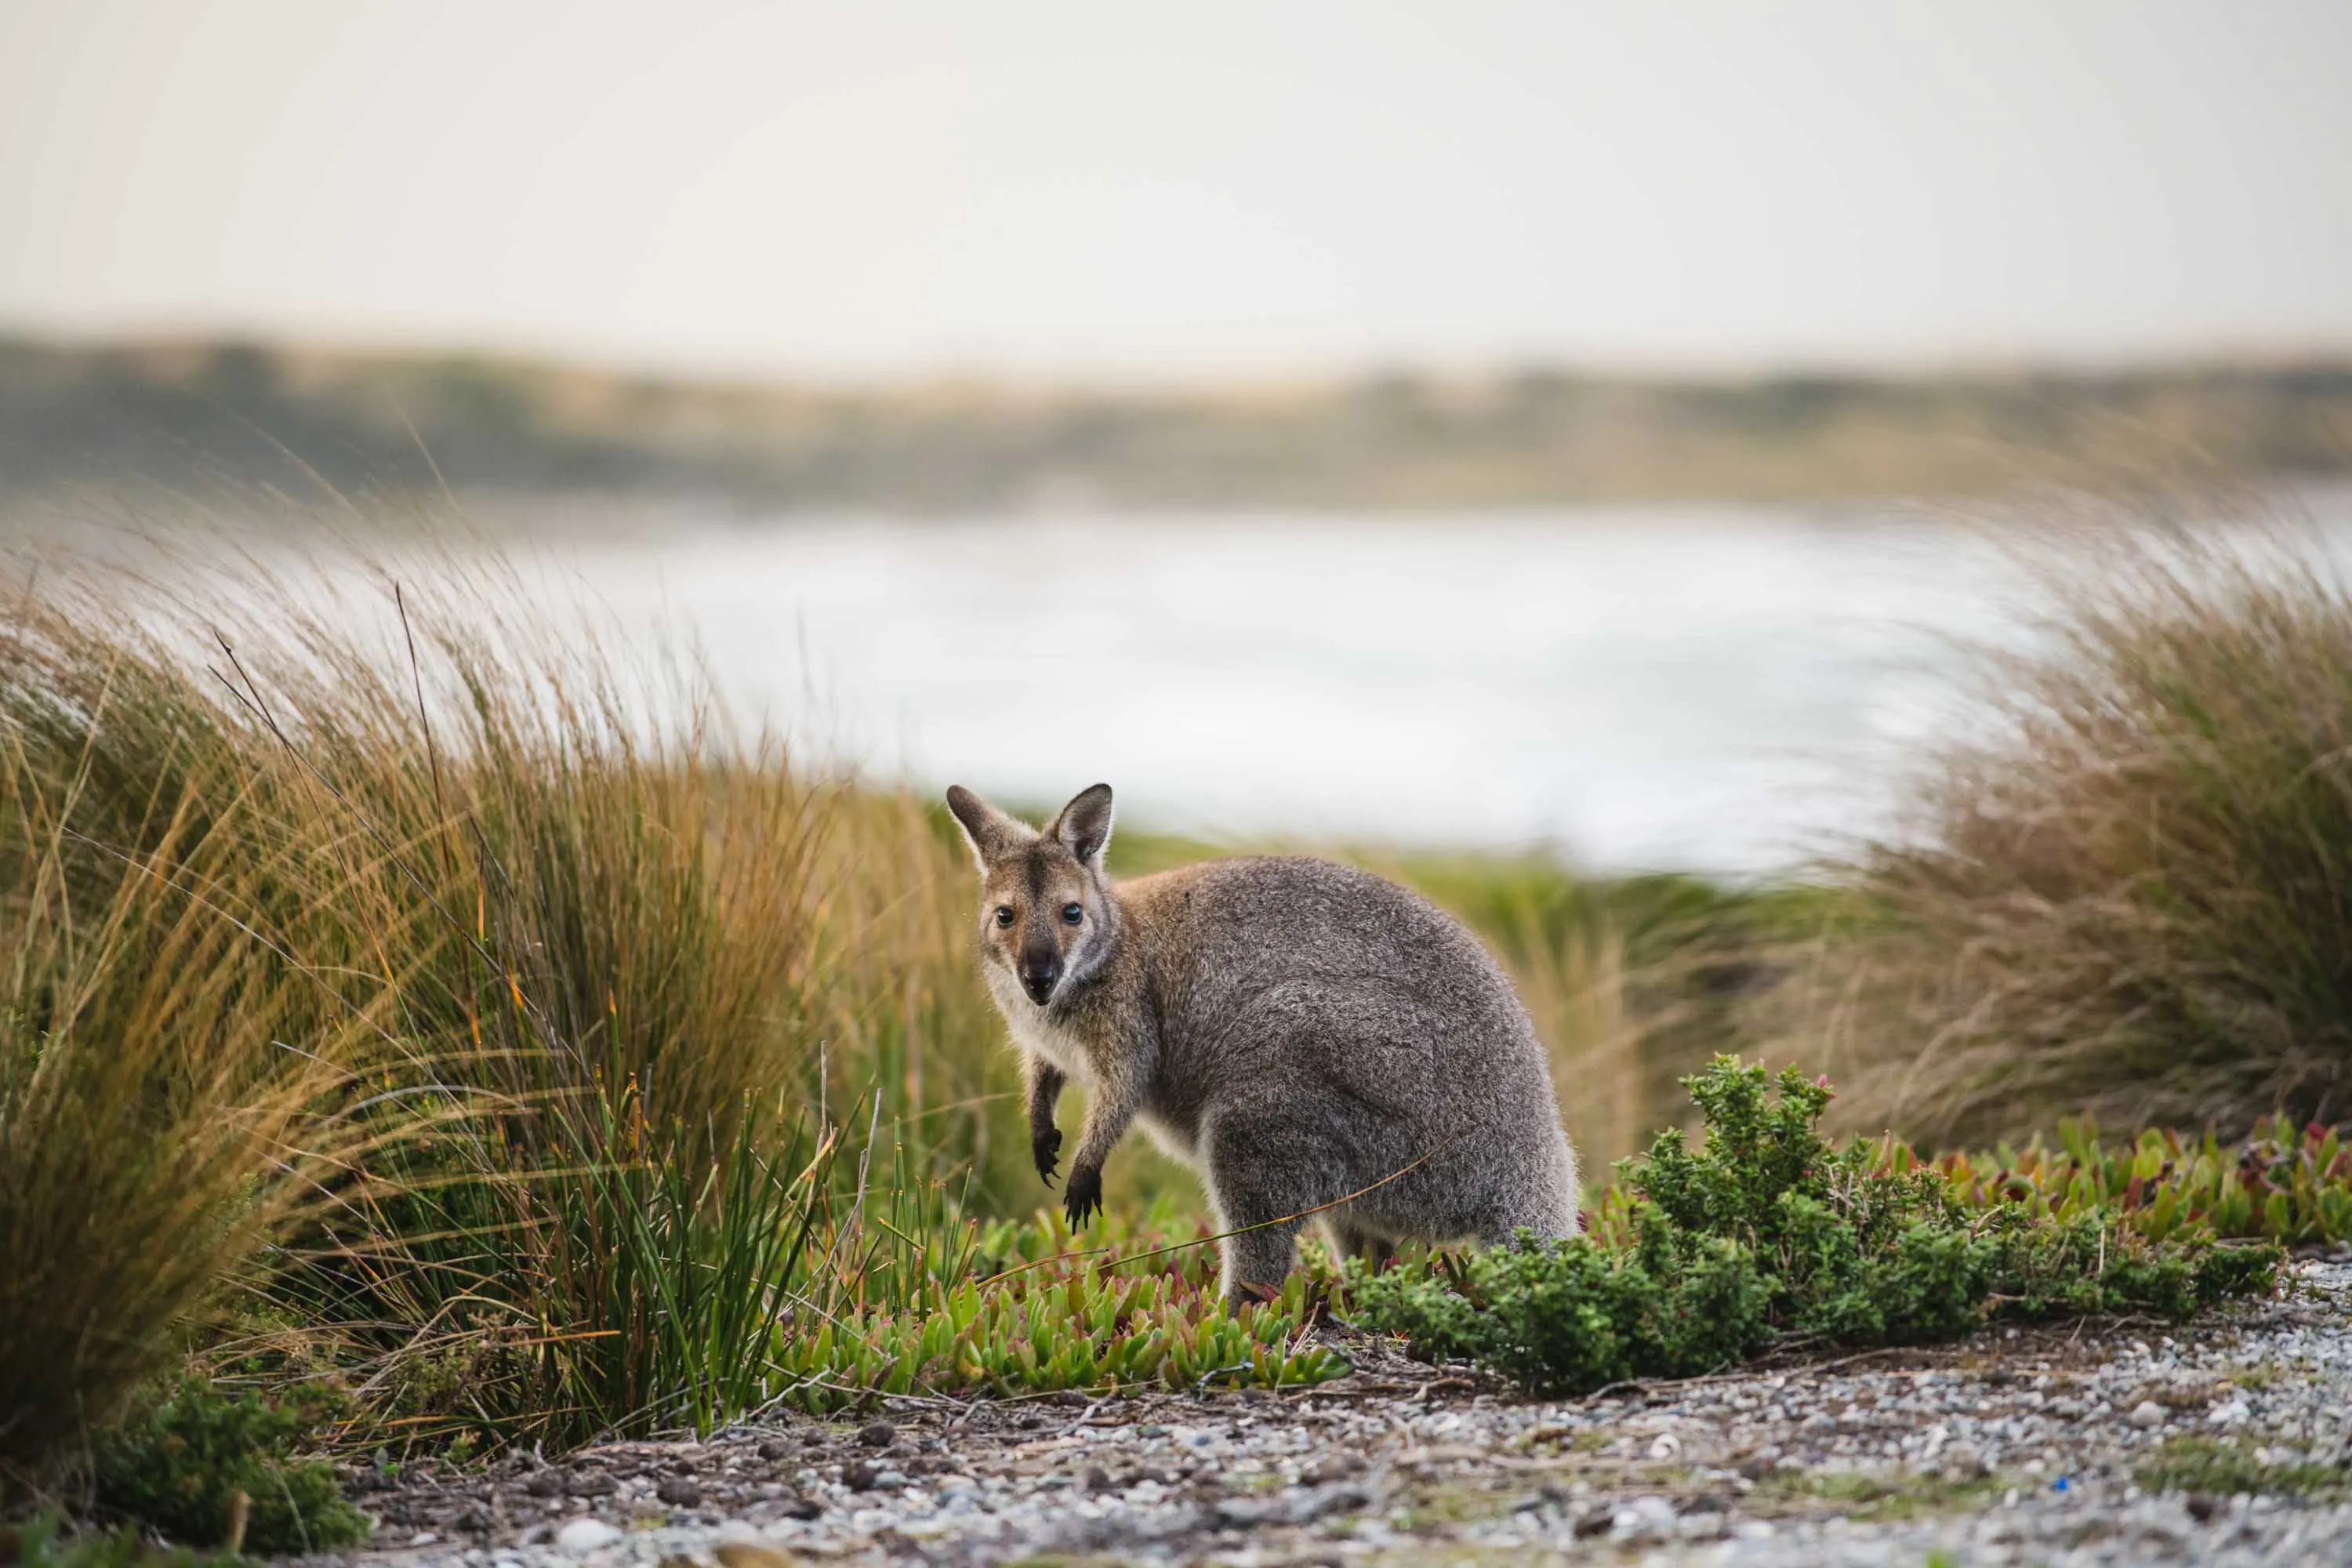 A small, grey wallaby sits in scrubland with a body of water in the background.